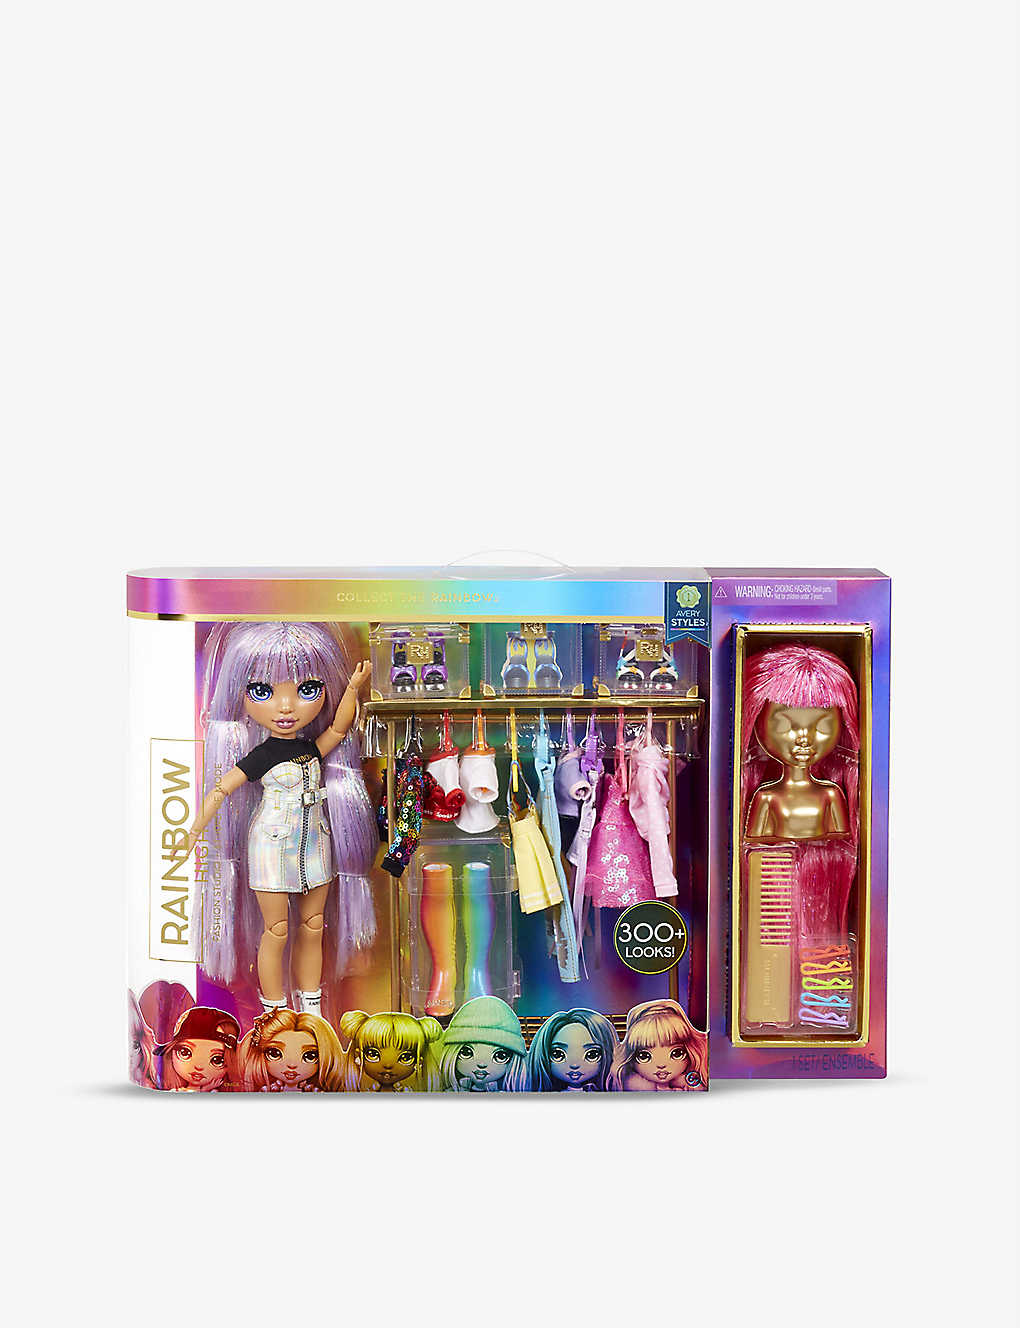 Rainbow High Fashion Studio Doll With 300 Looks 2020 for sale online 